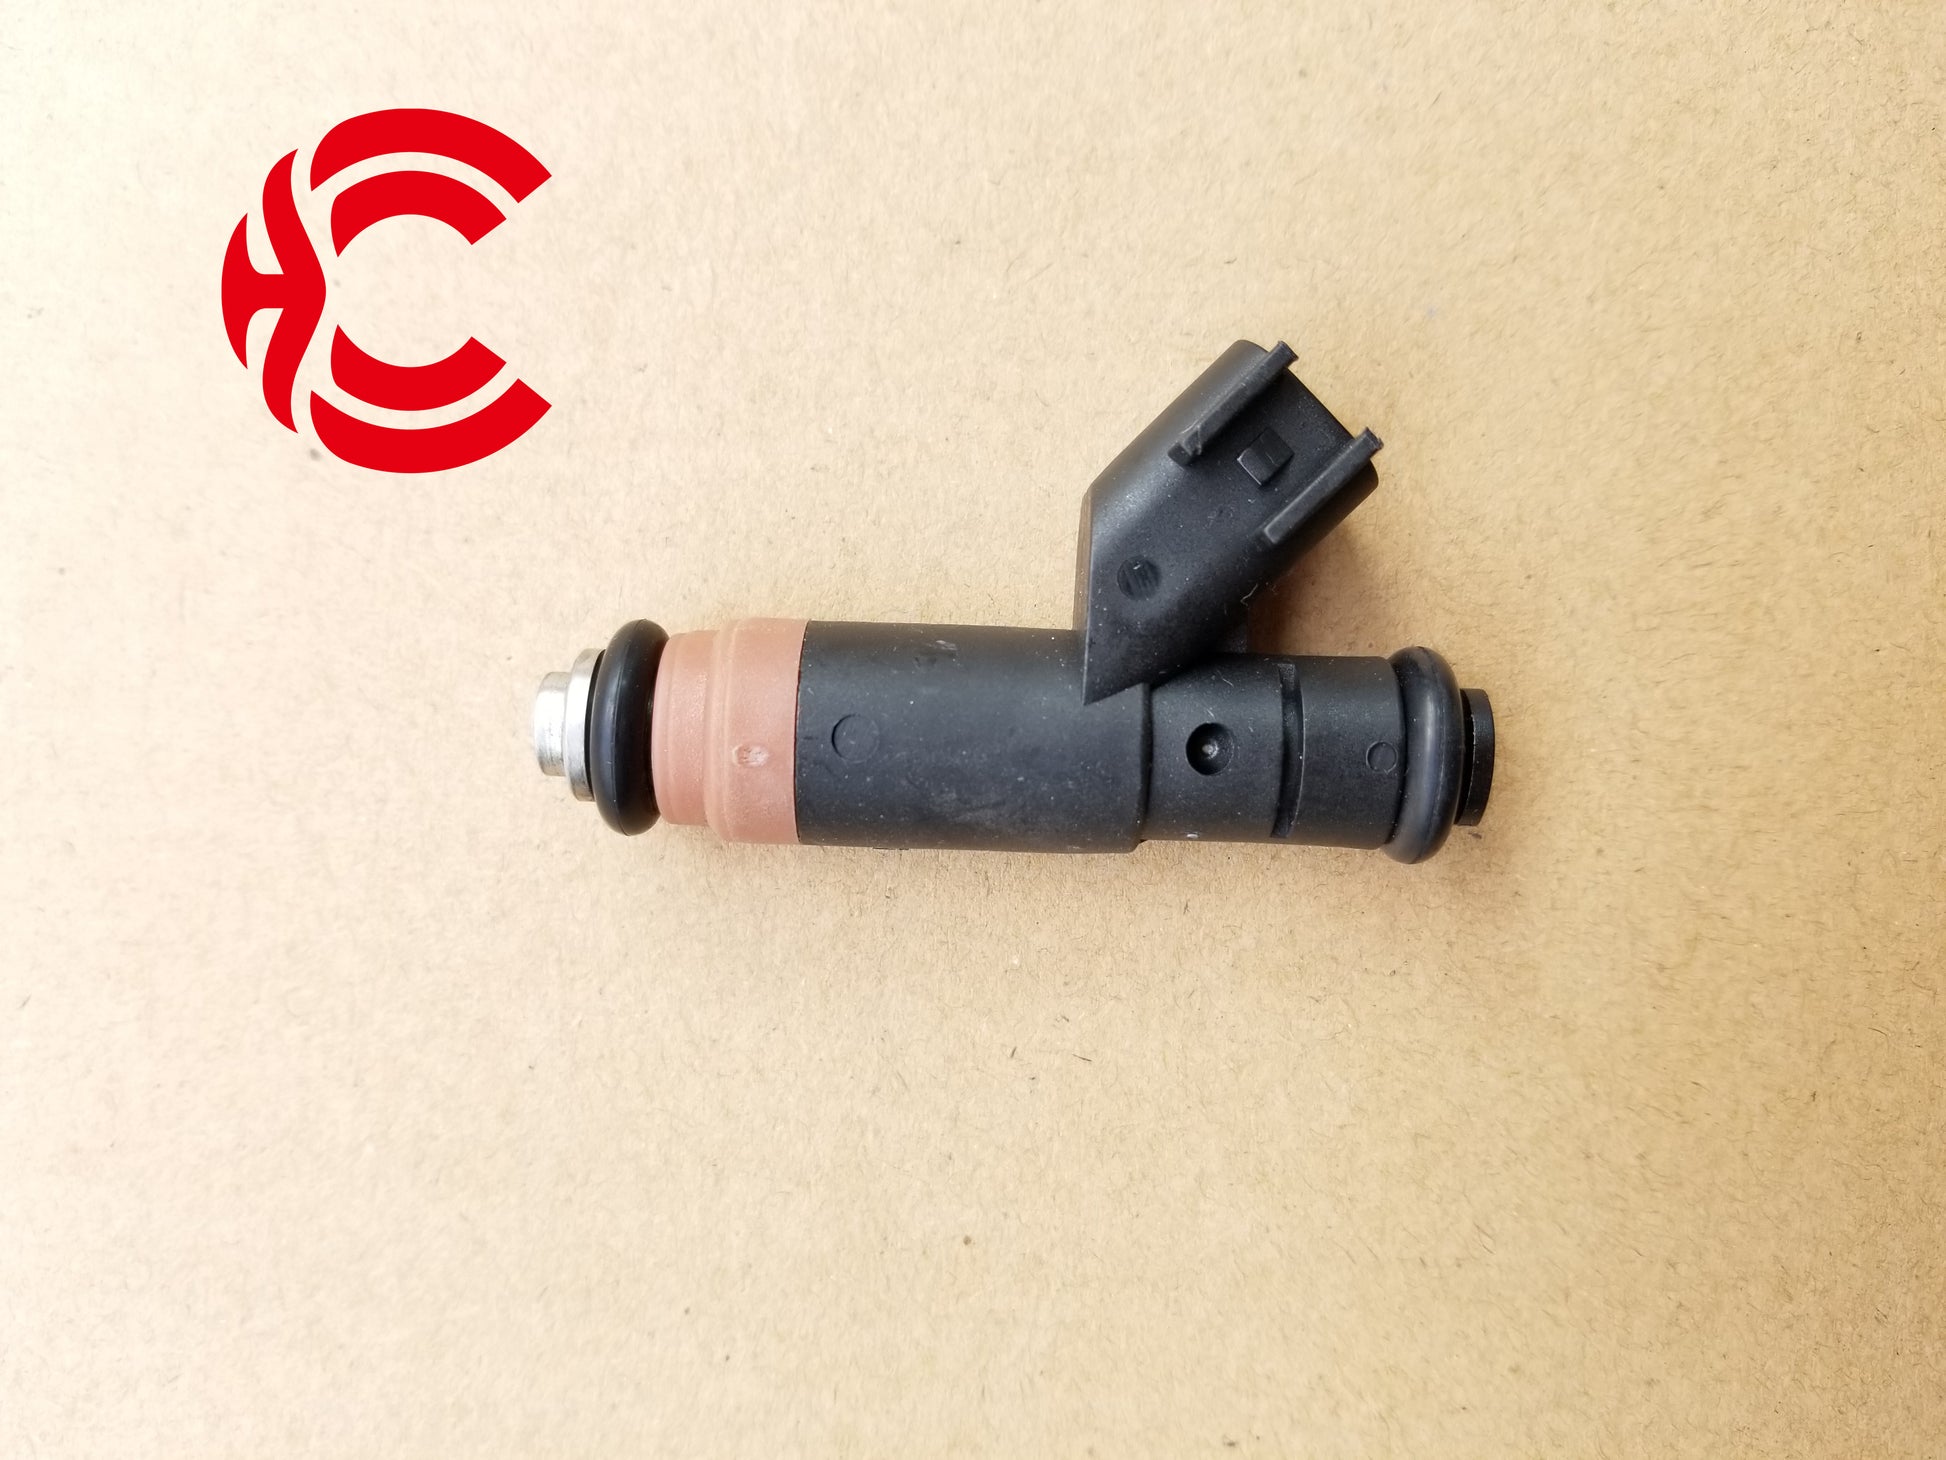 OEM: A045U724 Ecofit CumminsMaterial: MetalColor: SilverOrigin: Made in ChinaWeight: 100gPacking List: 1* Adblue/Urea Nozzle Core More ServiceWe can provide OEM Manufacturing serviceWe can Be your one-step solution for Auto PartsWe can provide technical scheme for you Feel Free to Contact Us, We will get back to you as soon as possible.